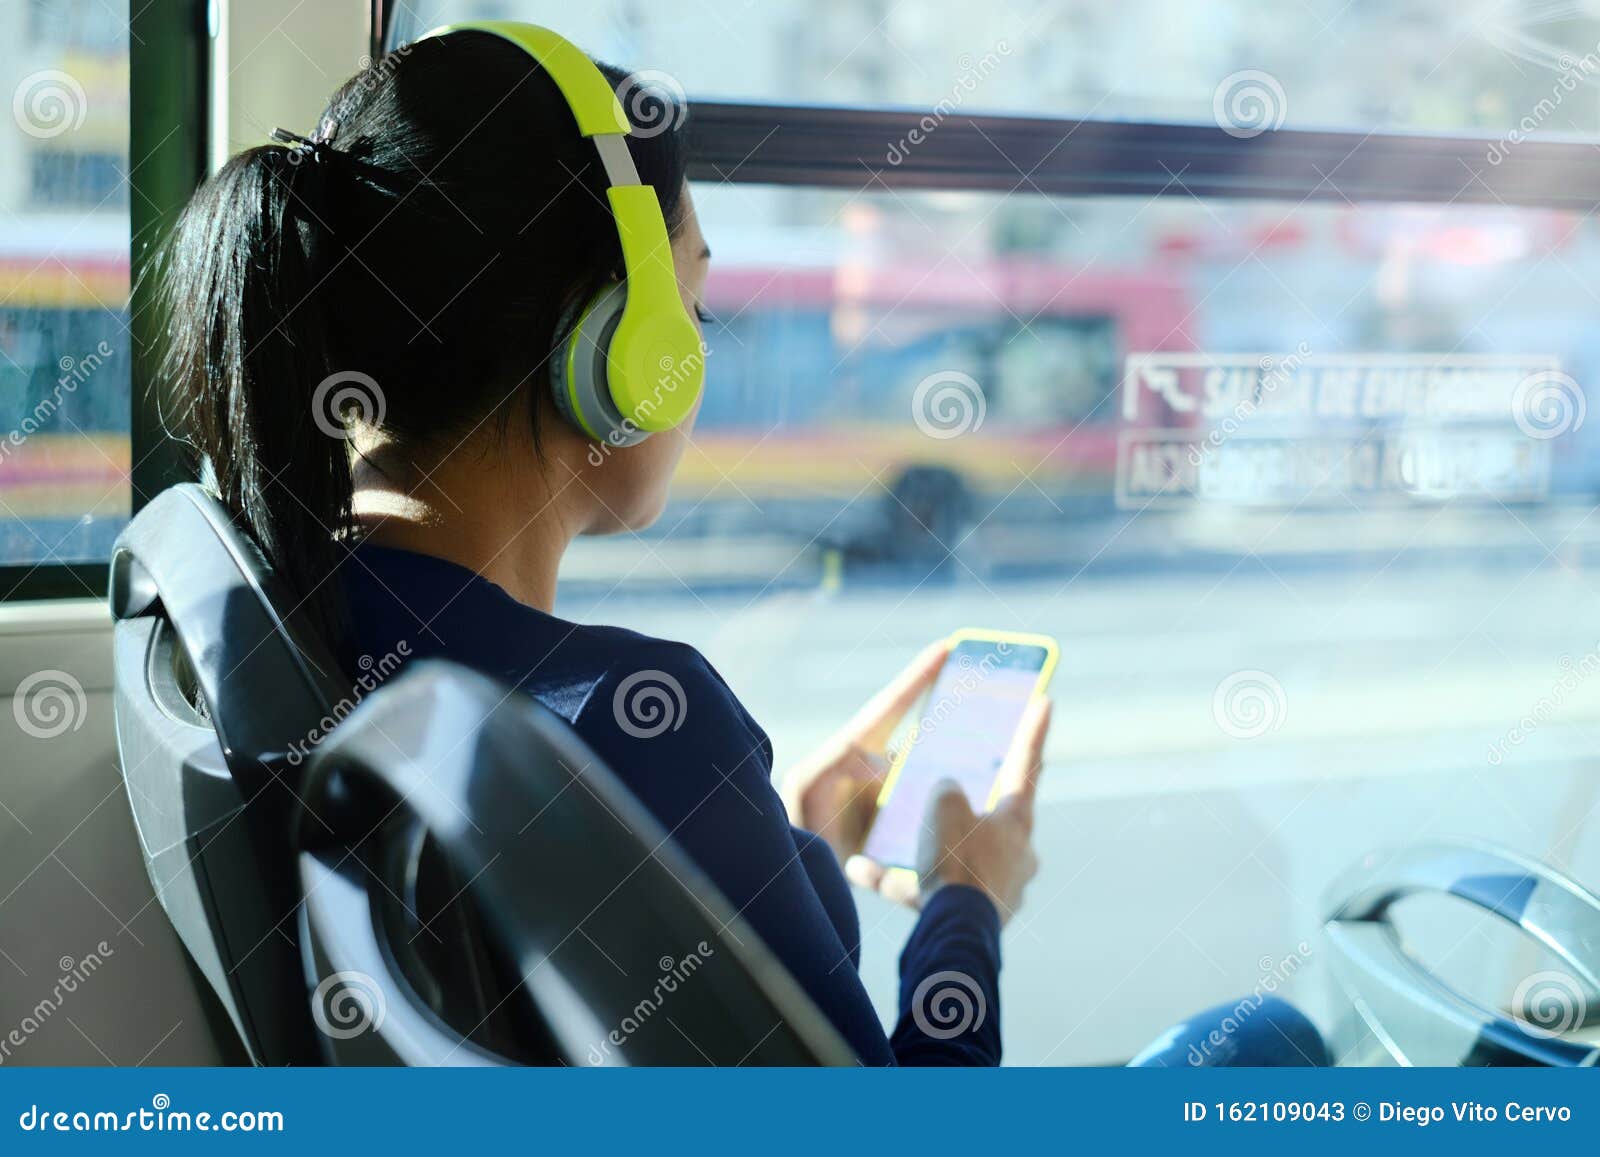 woman with headphones listening to music commuting by bus